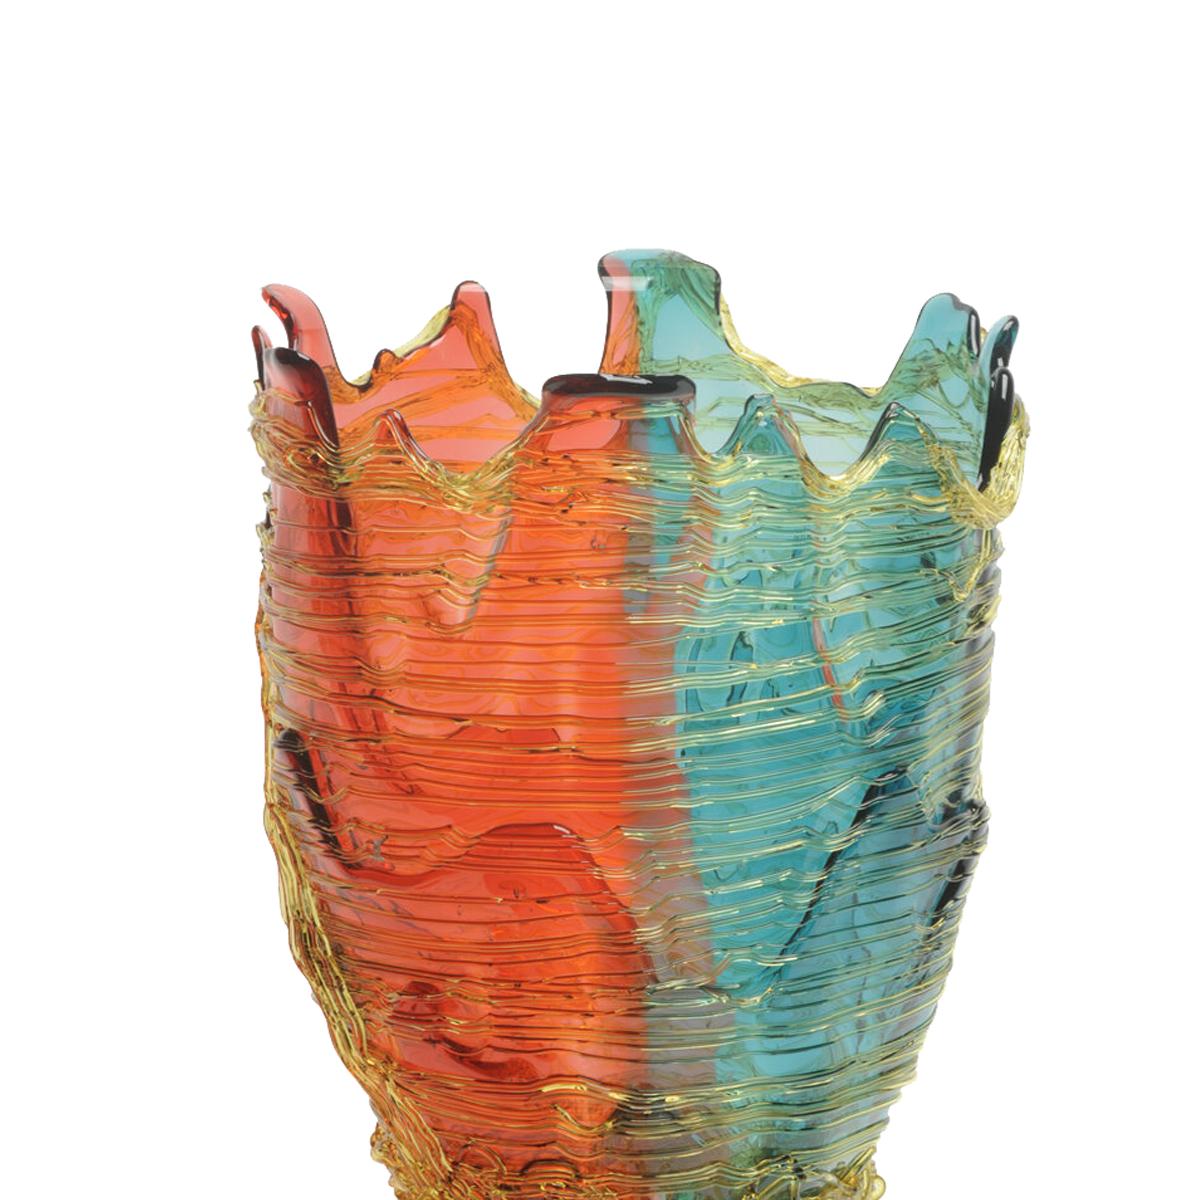 Spaghetti color vase, clear fuchsia, aqua and amber

Vase in soft resin designed by Gaetano Pesce in 1995 for Fish Design collection.

Measures: M Ø 16cm x H 26cm

Colour: clear fuchsia, aqua and amber
Vase in soft resin designed by Gaetano